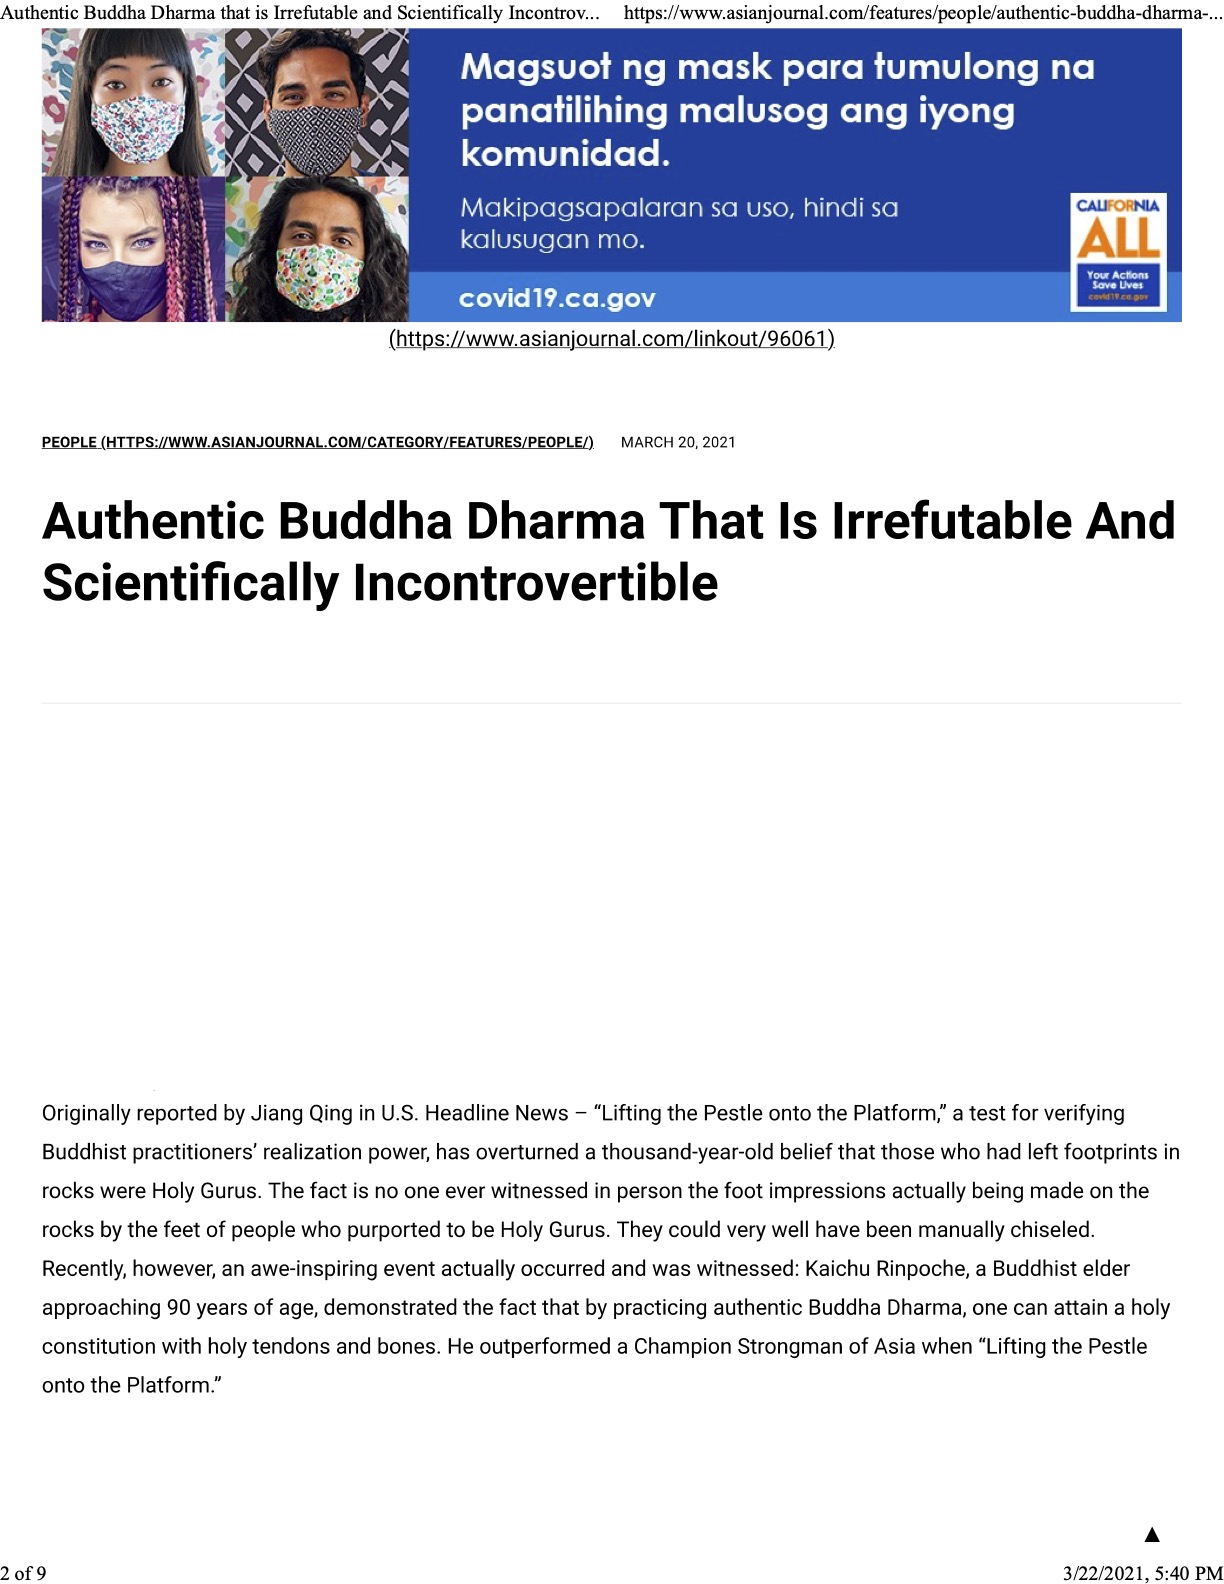 page1 -Online news AJ_Authentic Buddha Dharma that is Irrefutable and Scientifically Incontrovertible_3-20-2021